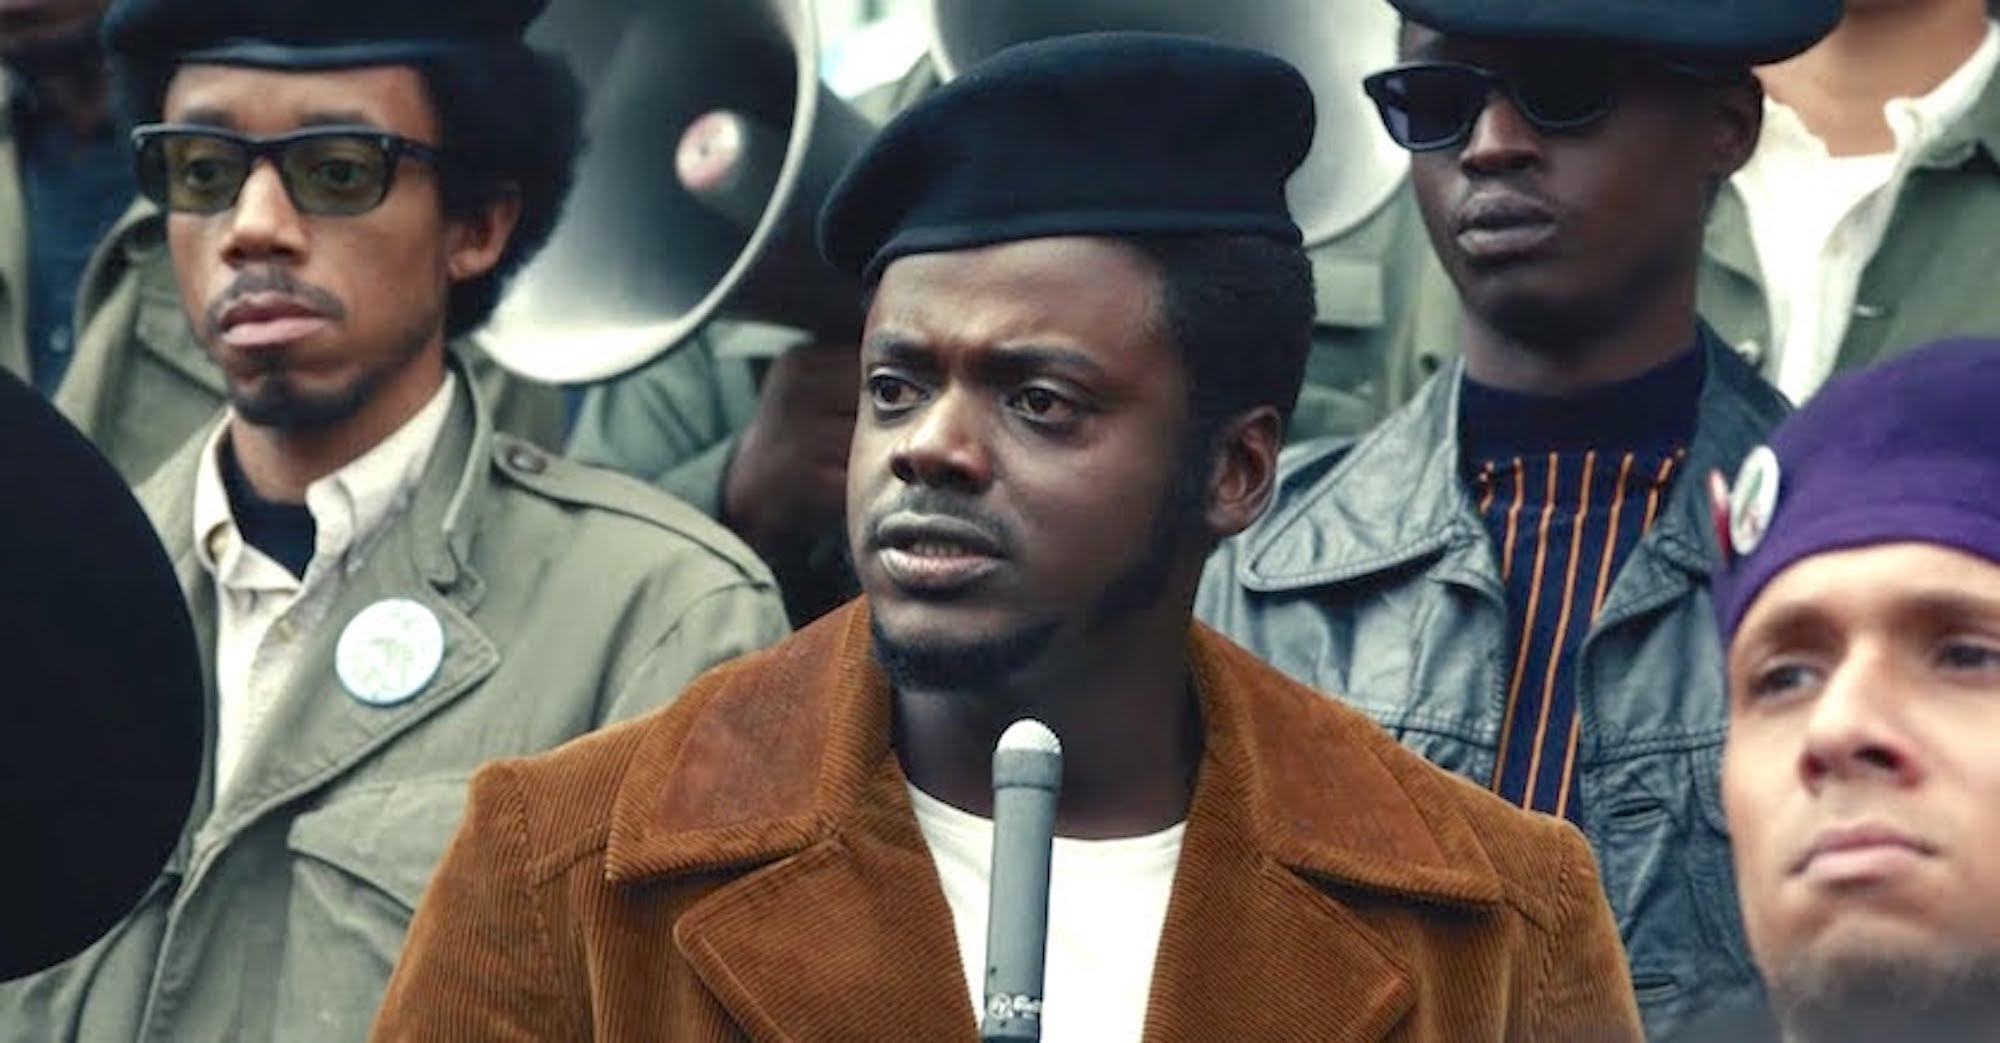 WB’s Judas And The Black Messiah Drops Second Trailer